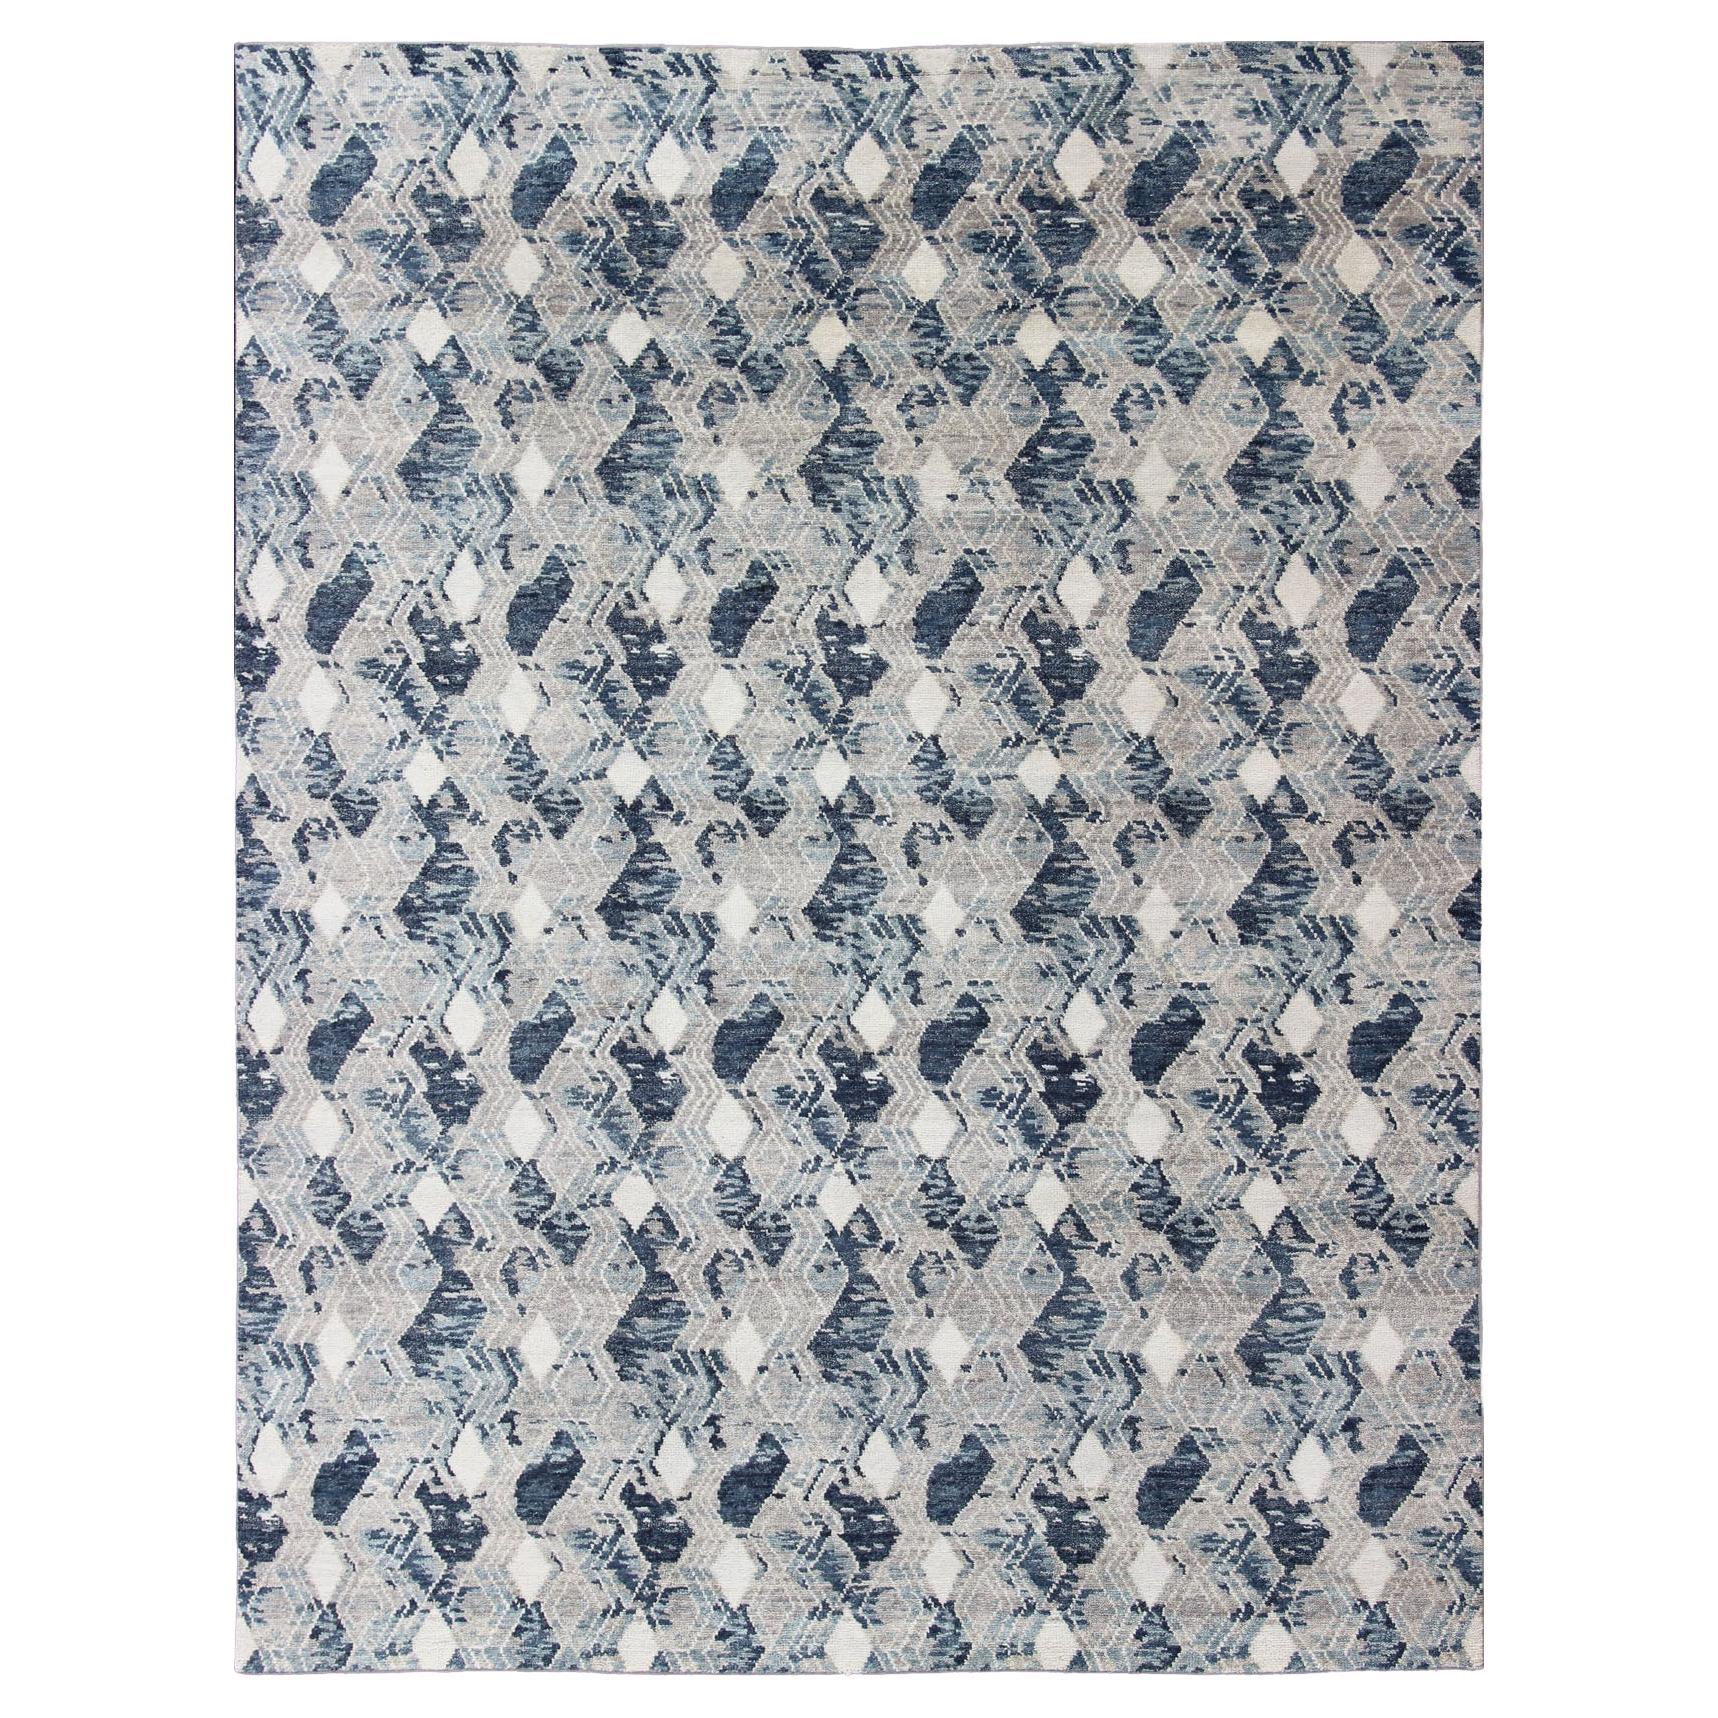 Oversized Modern Diamond Designed Indian Area Rug in Blue, Gray, and White For Sale